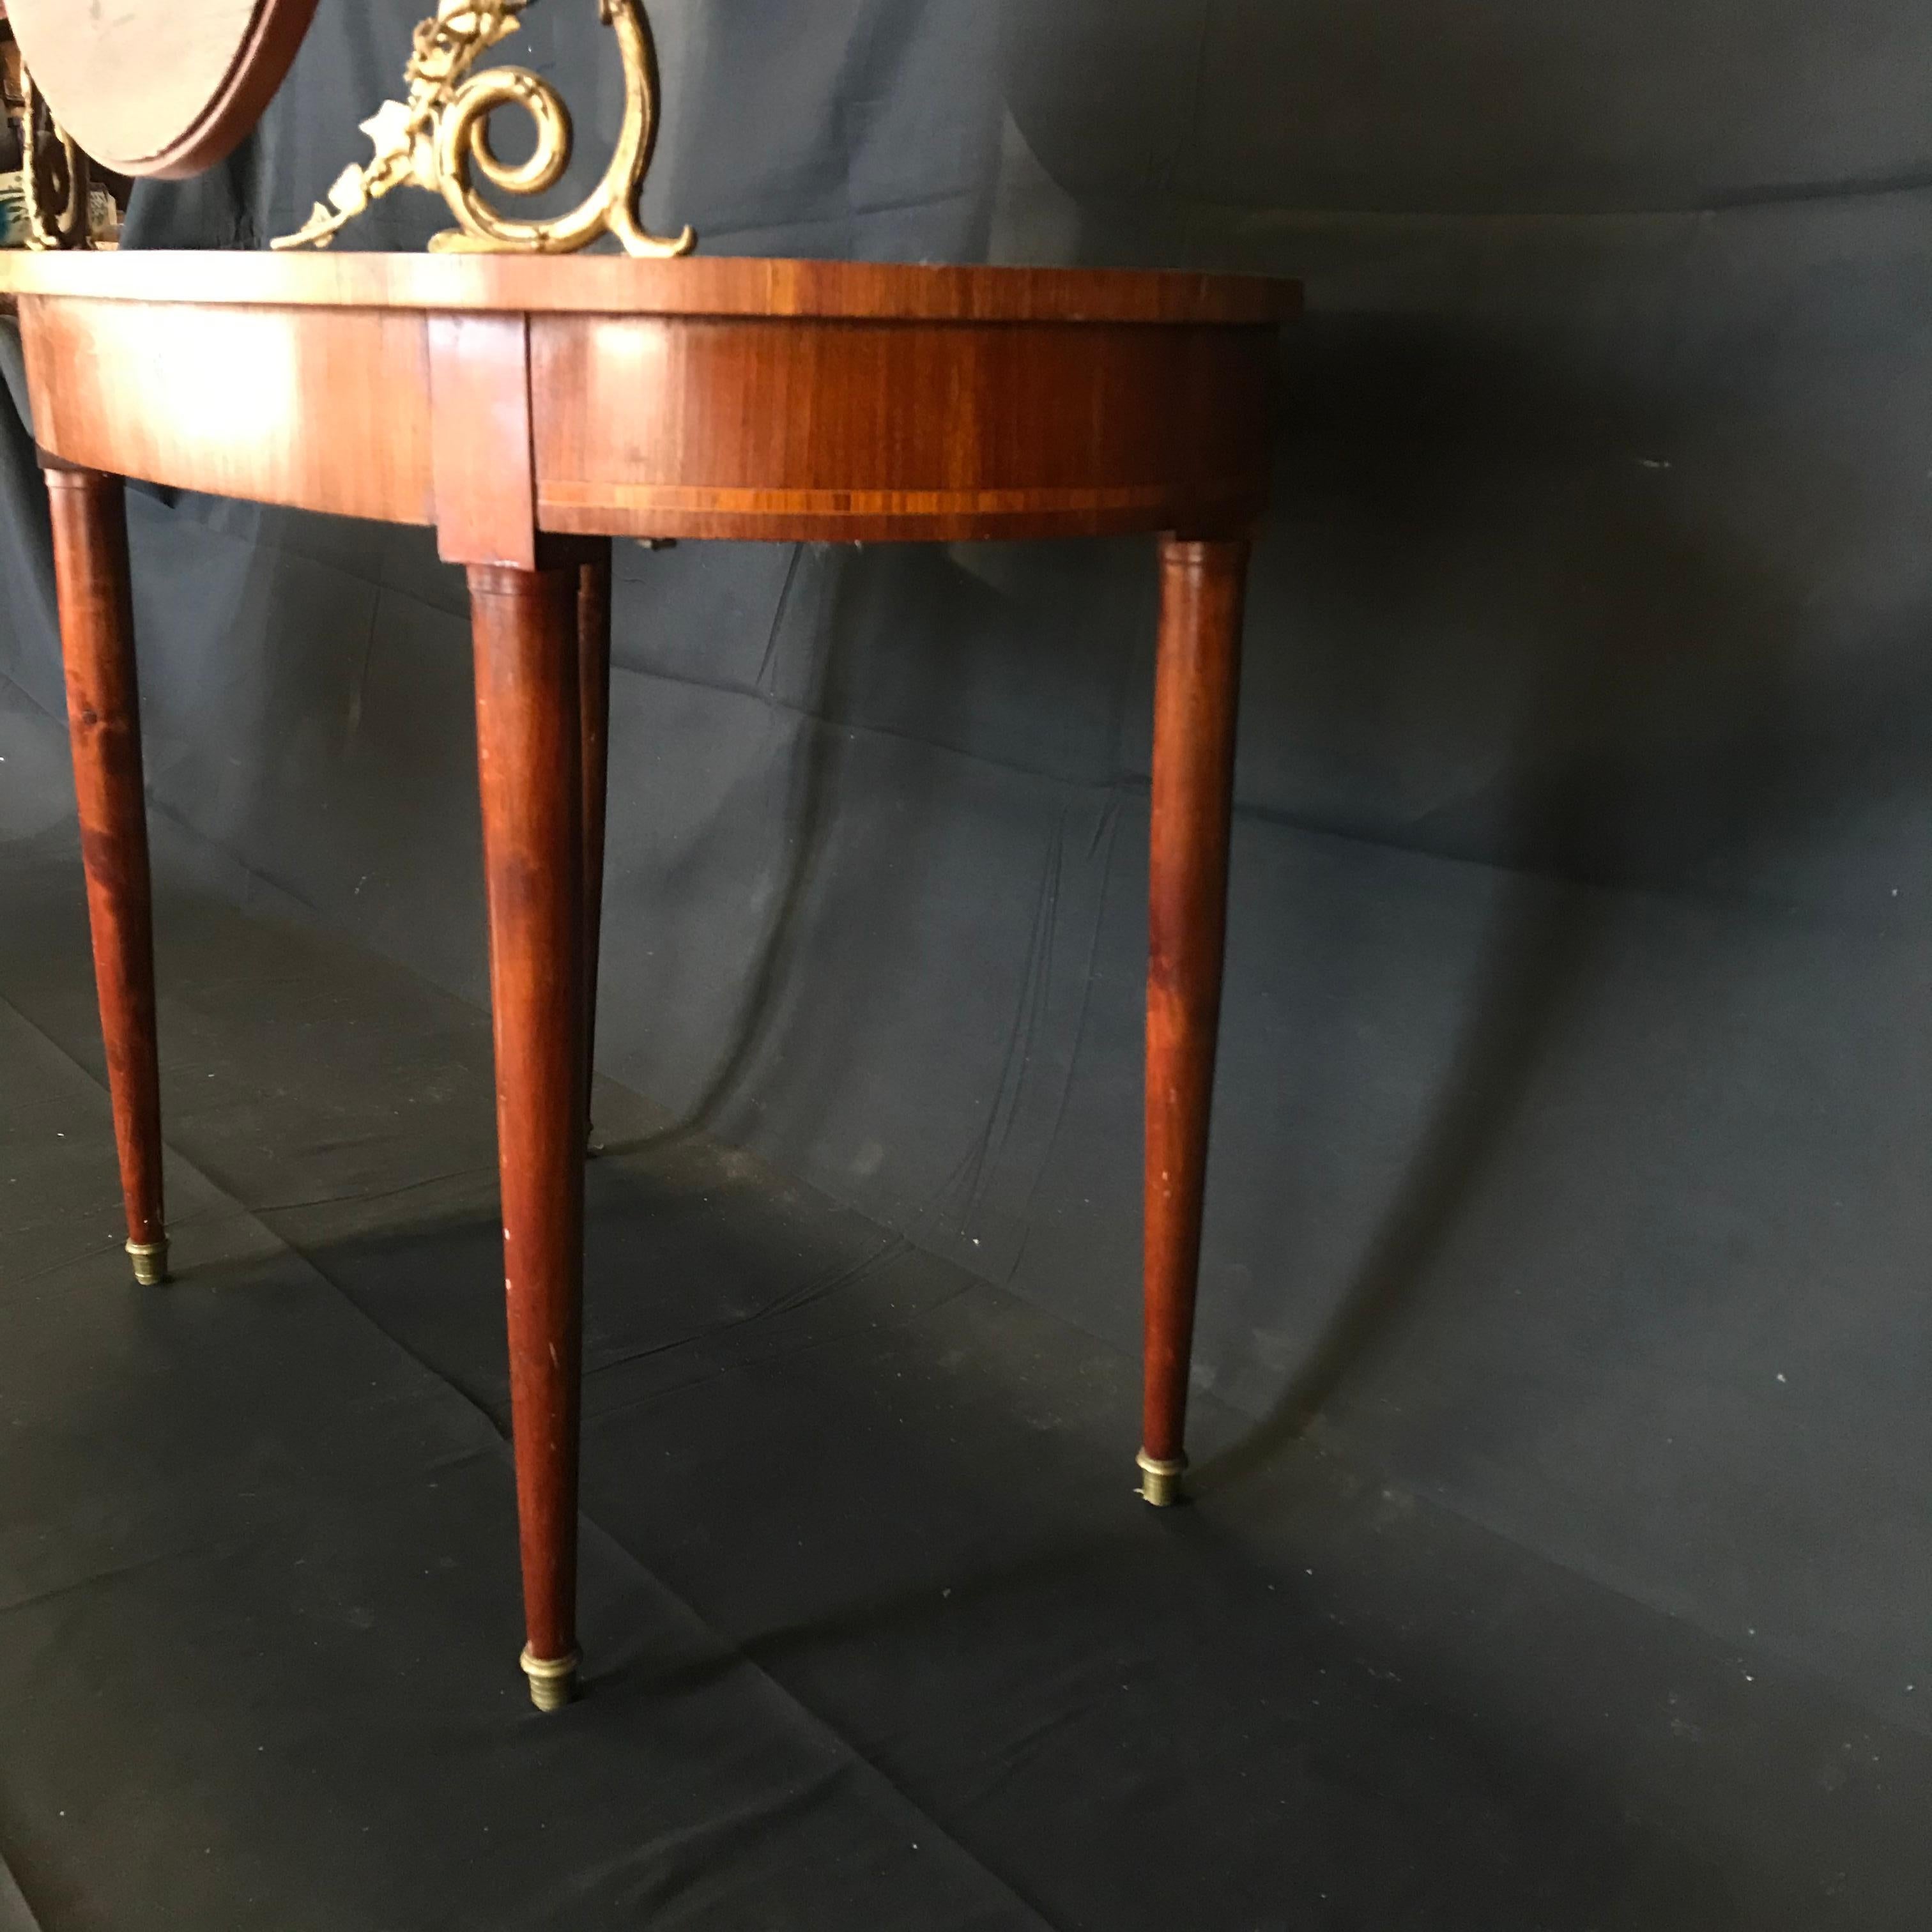 Romantic French Inlaid Walnut and Bronze Dressing Table with Candelabra Arms 13